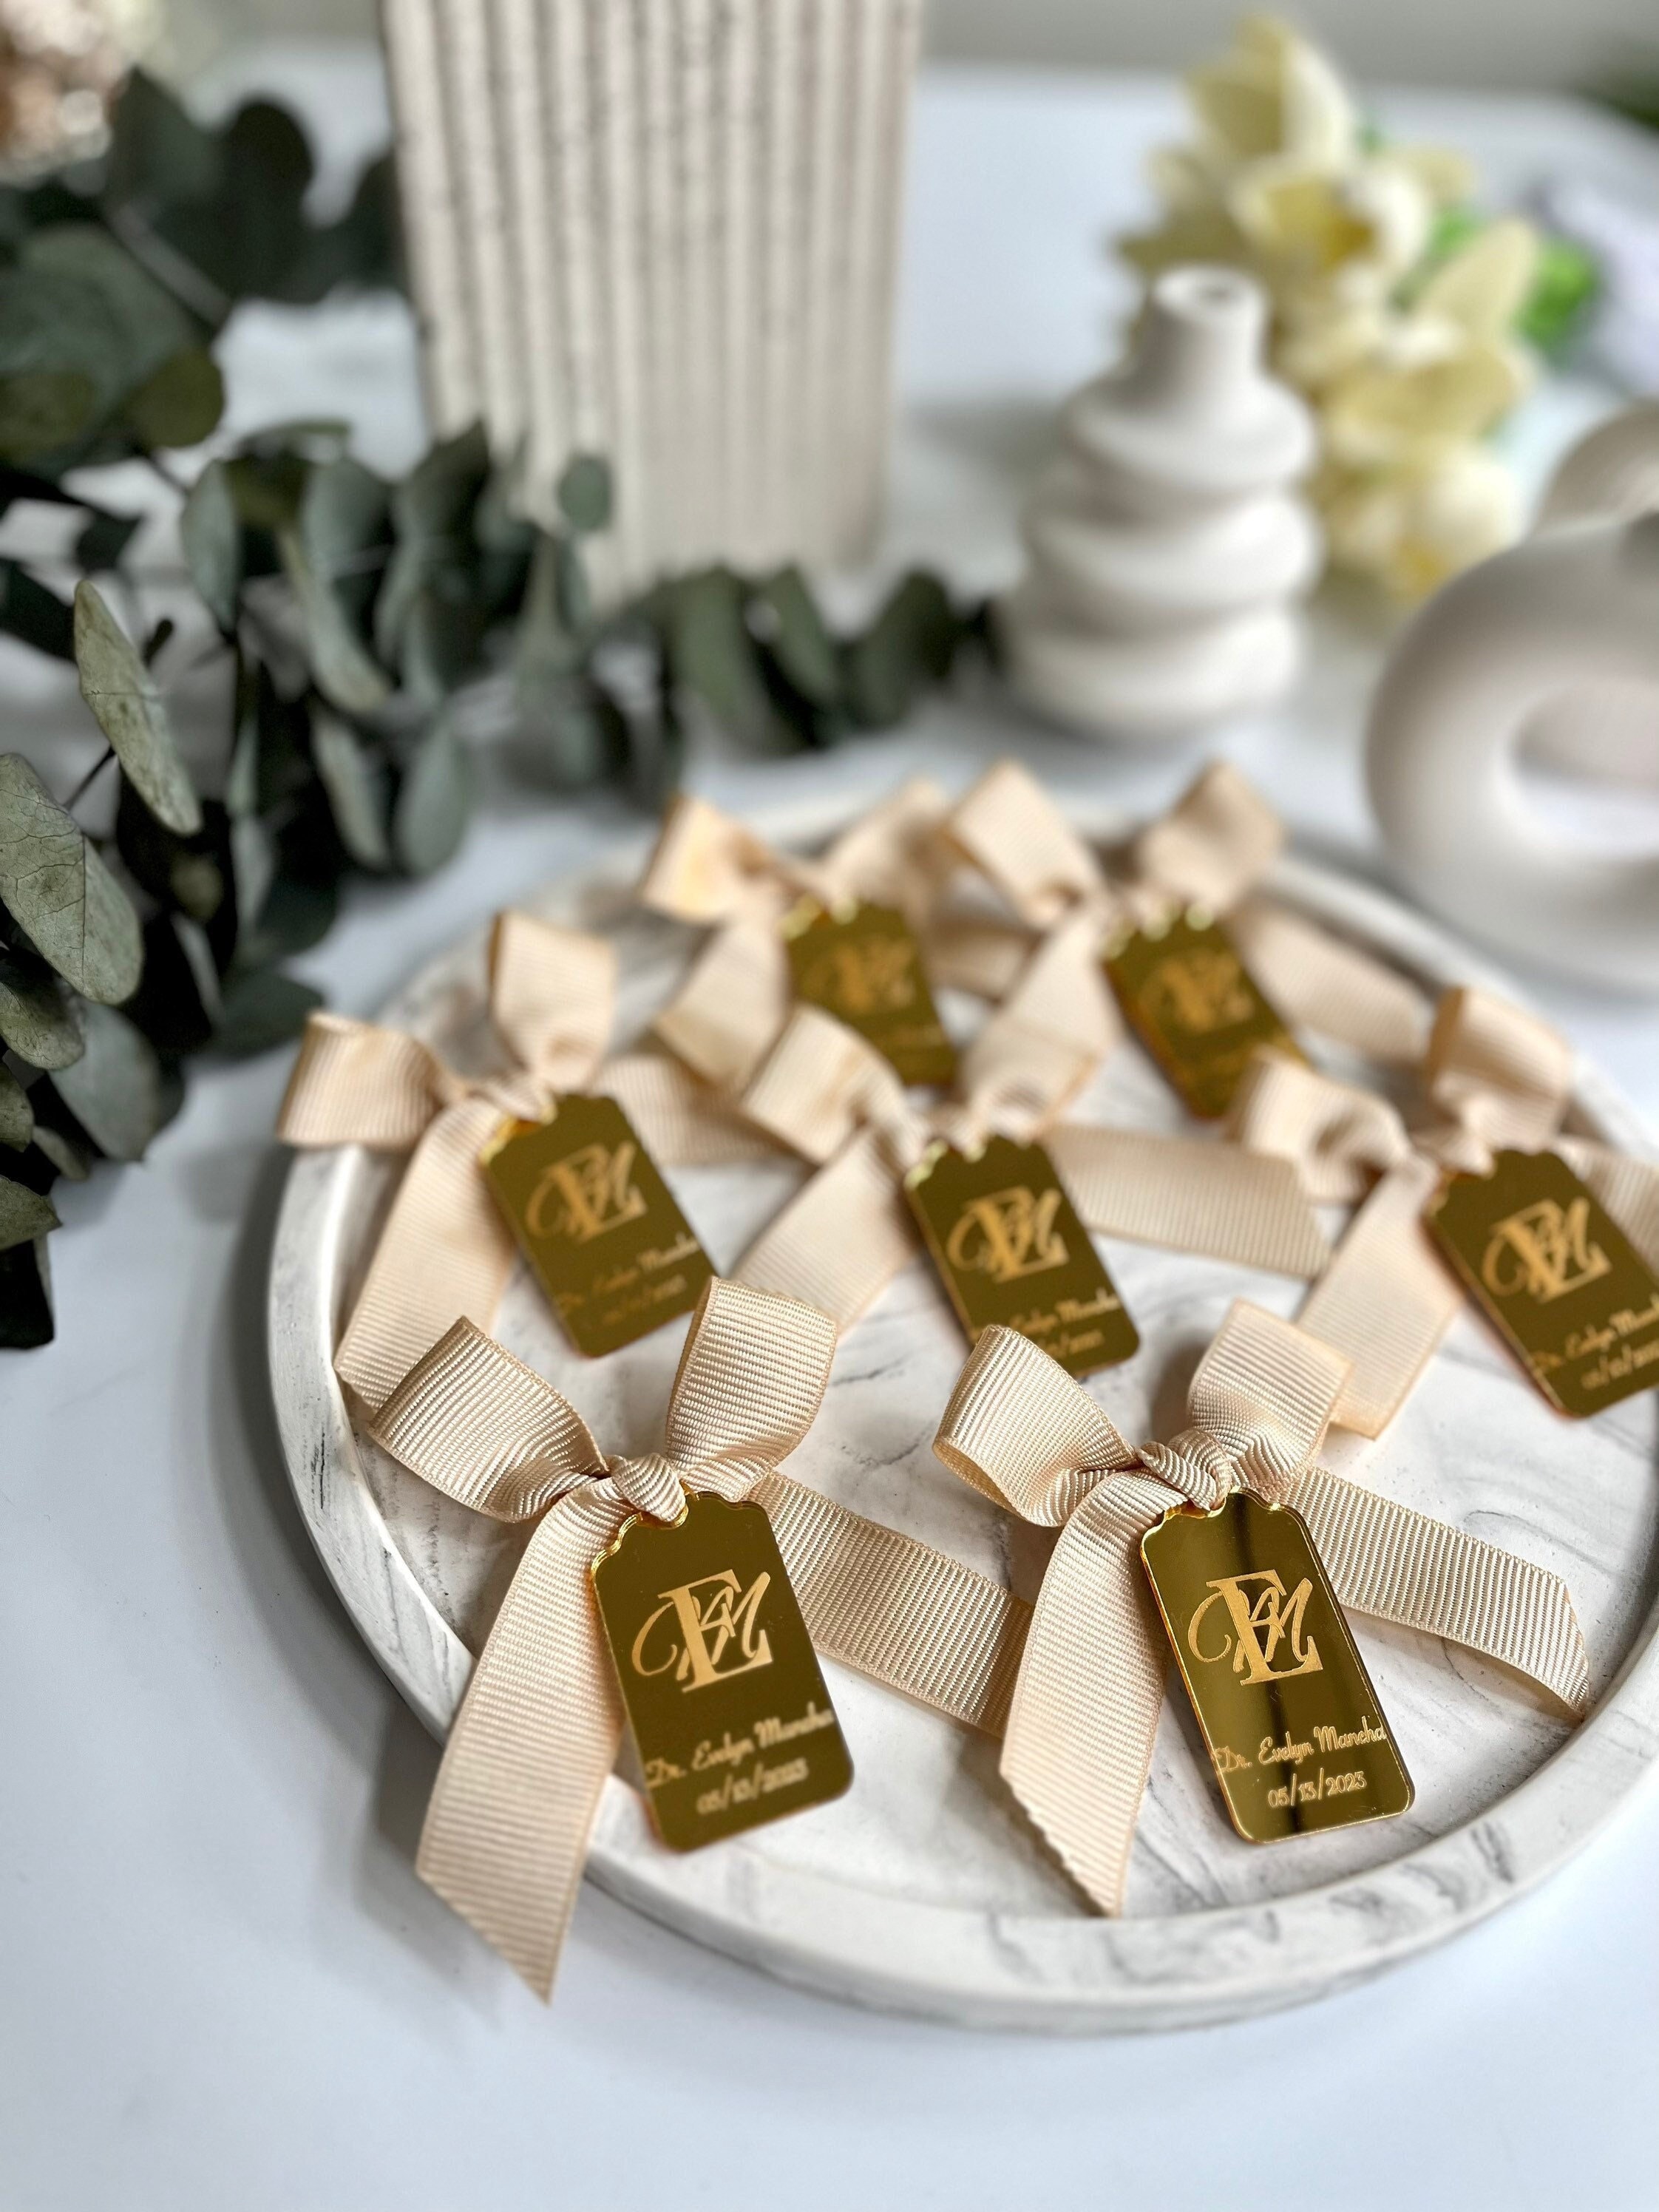 12 Pcs Personalized Laser Cut Gold/Silver Acrylic Name Baby Name Tags Brand  Wedding Table Decoration Chocolate Baptism Box Decor